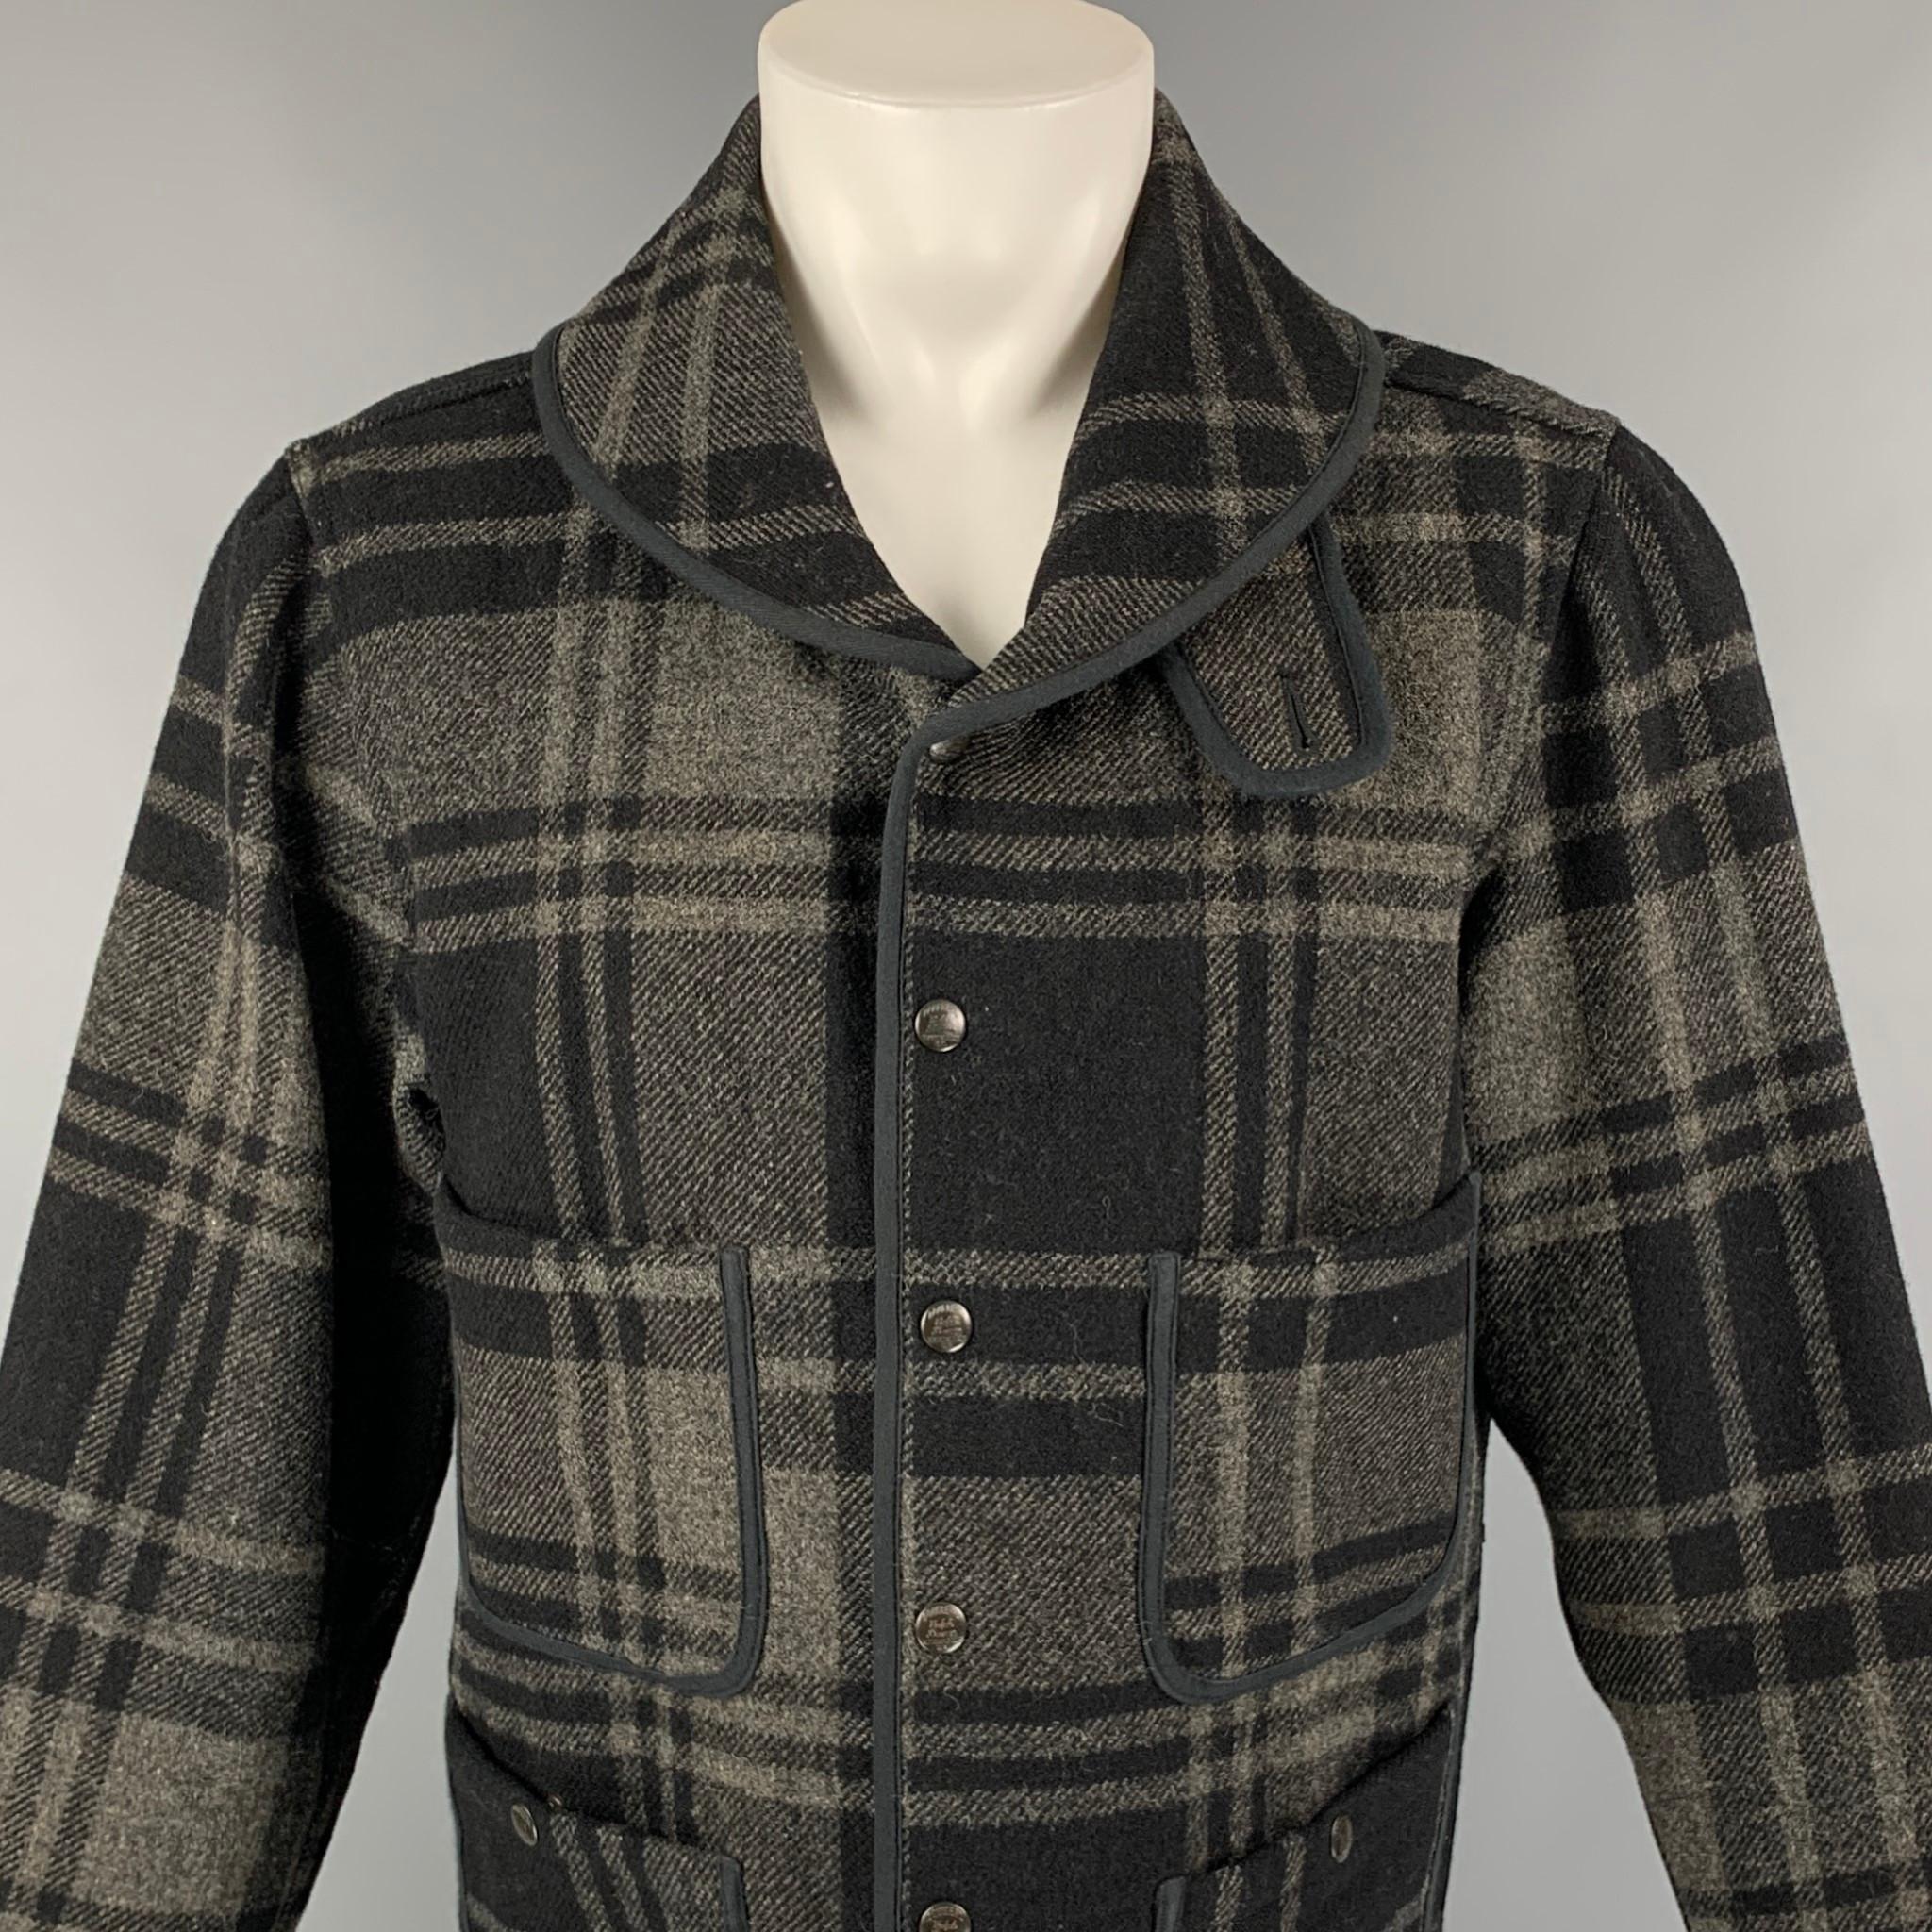 RRL by RALPH LAUREN jacket comes in a black & grey wool featuring a shawl collar, back belt, patch pockets, and a snap button closure. 

Very Good Pre-Owned Condition.
Marked: M

Measurements:

Shoulder: 18 in.
Chest: 40 in.
Sleeve: 27 in.
Length: